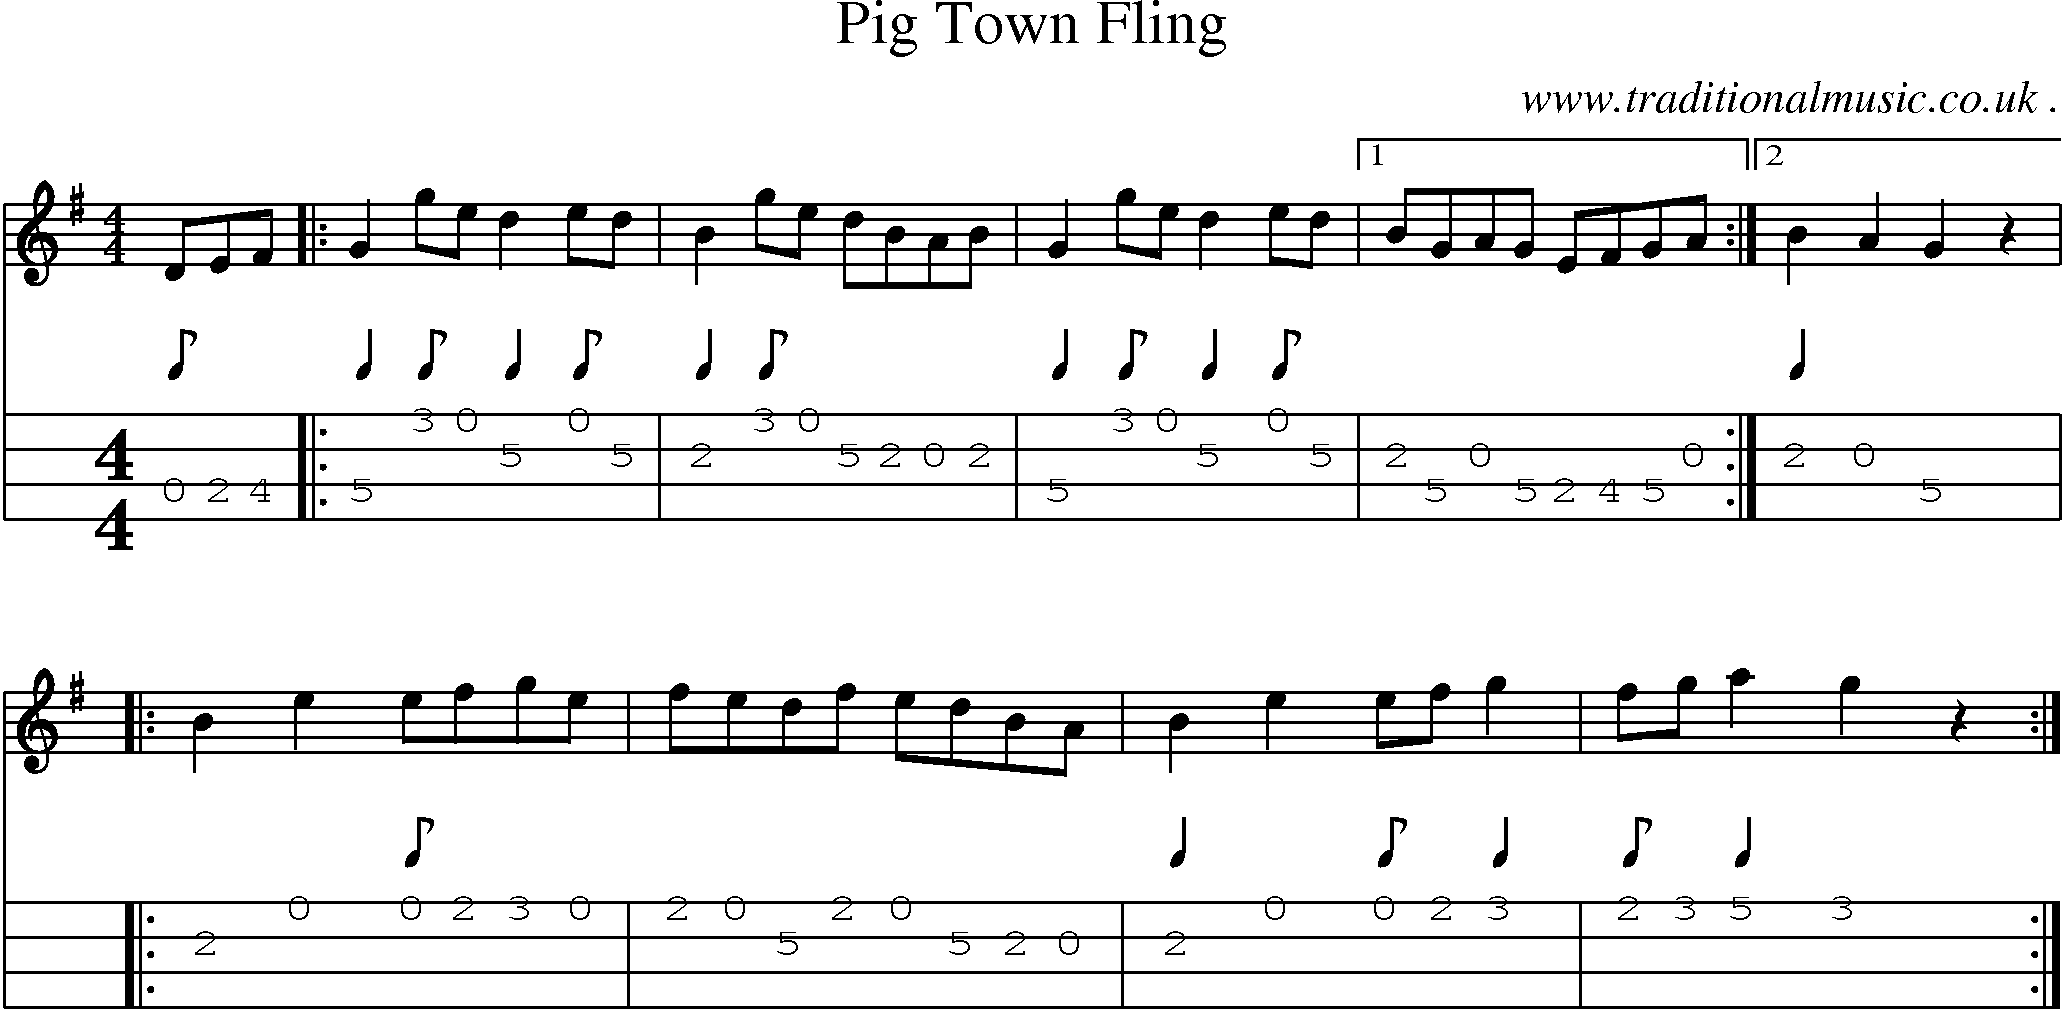 Sheet-music  score, Chords and Mandolin Tabs for Pig Town Fling